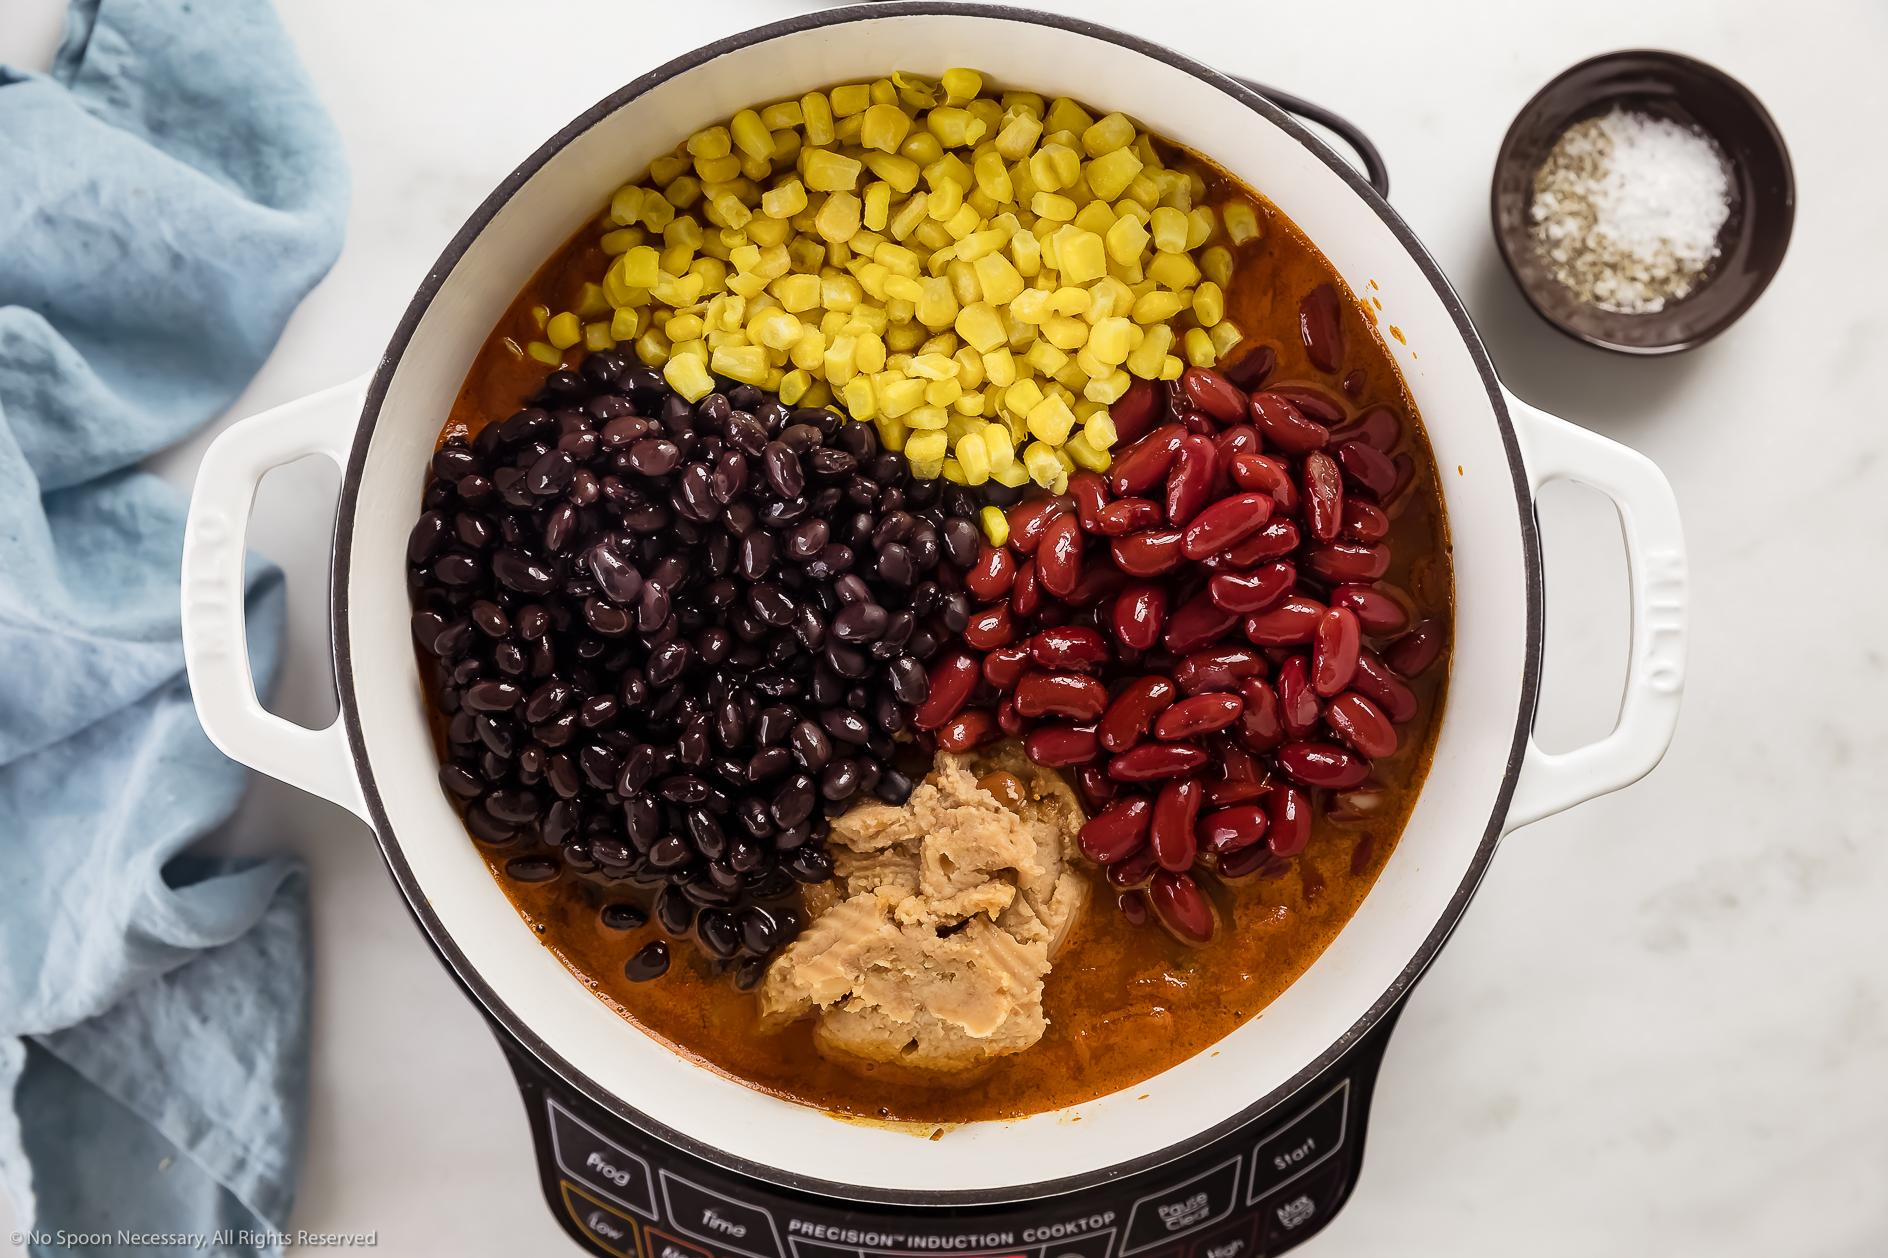  Chili weather calls for a warm and cozy meal like this.